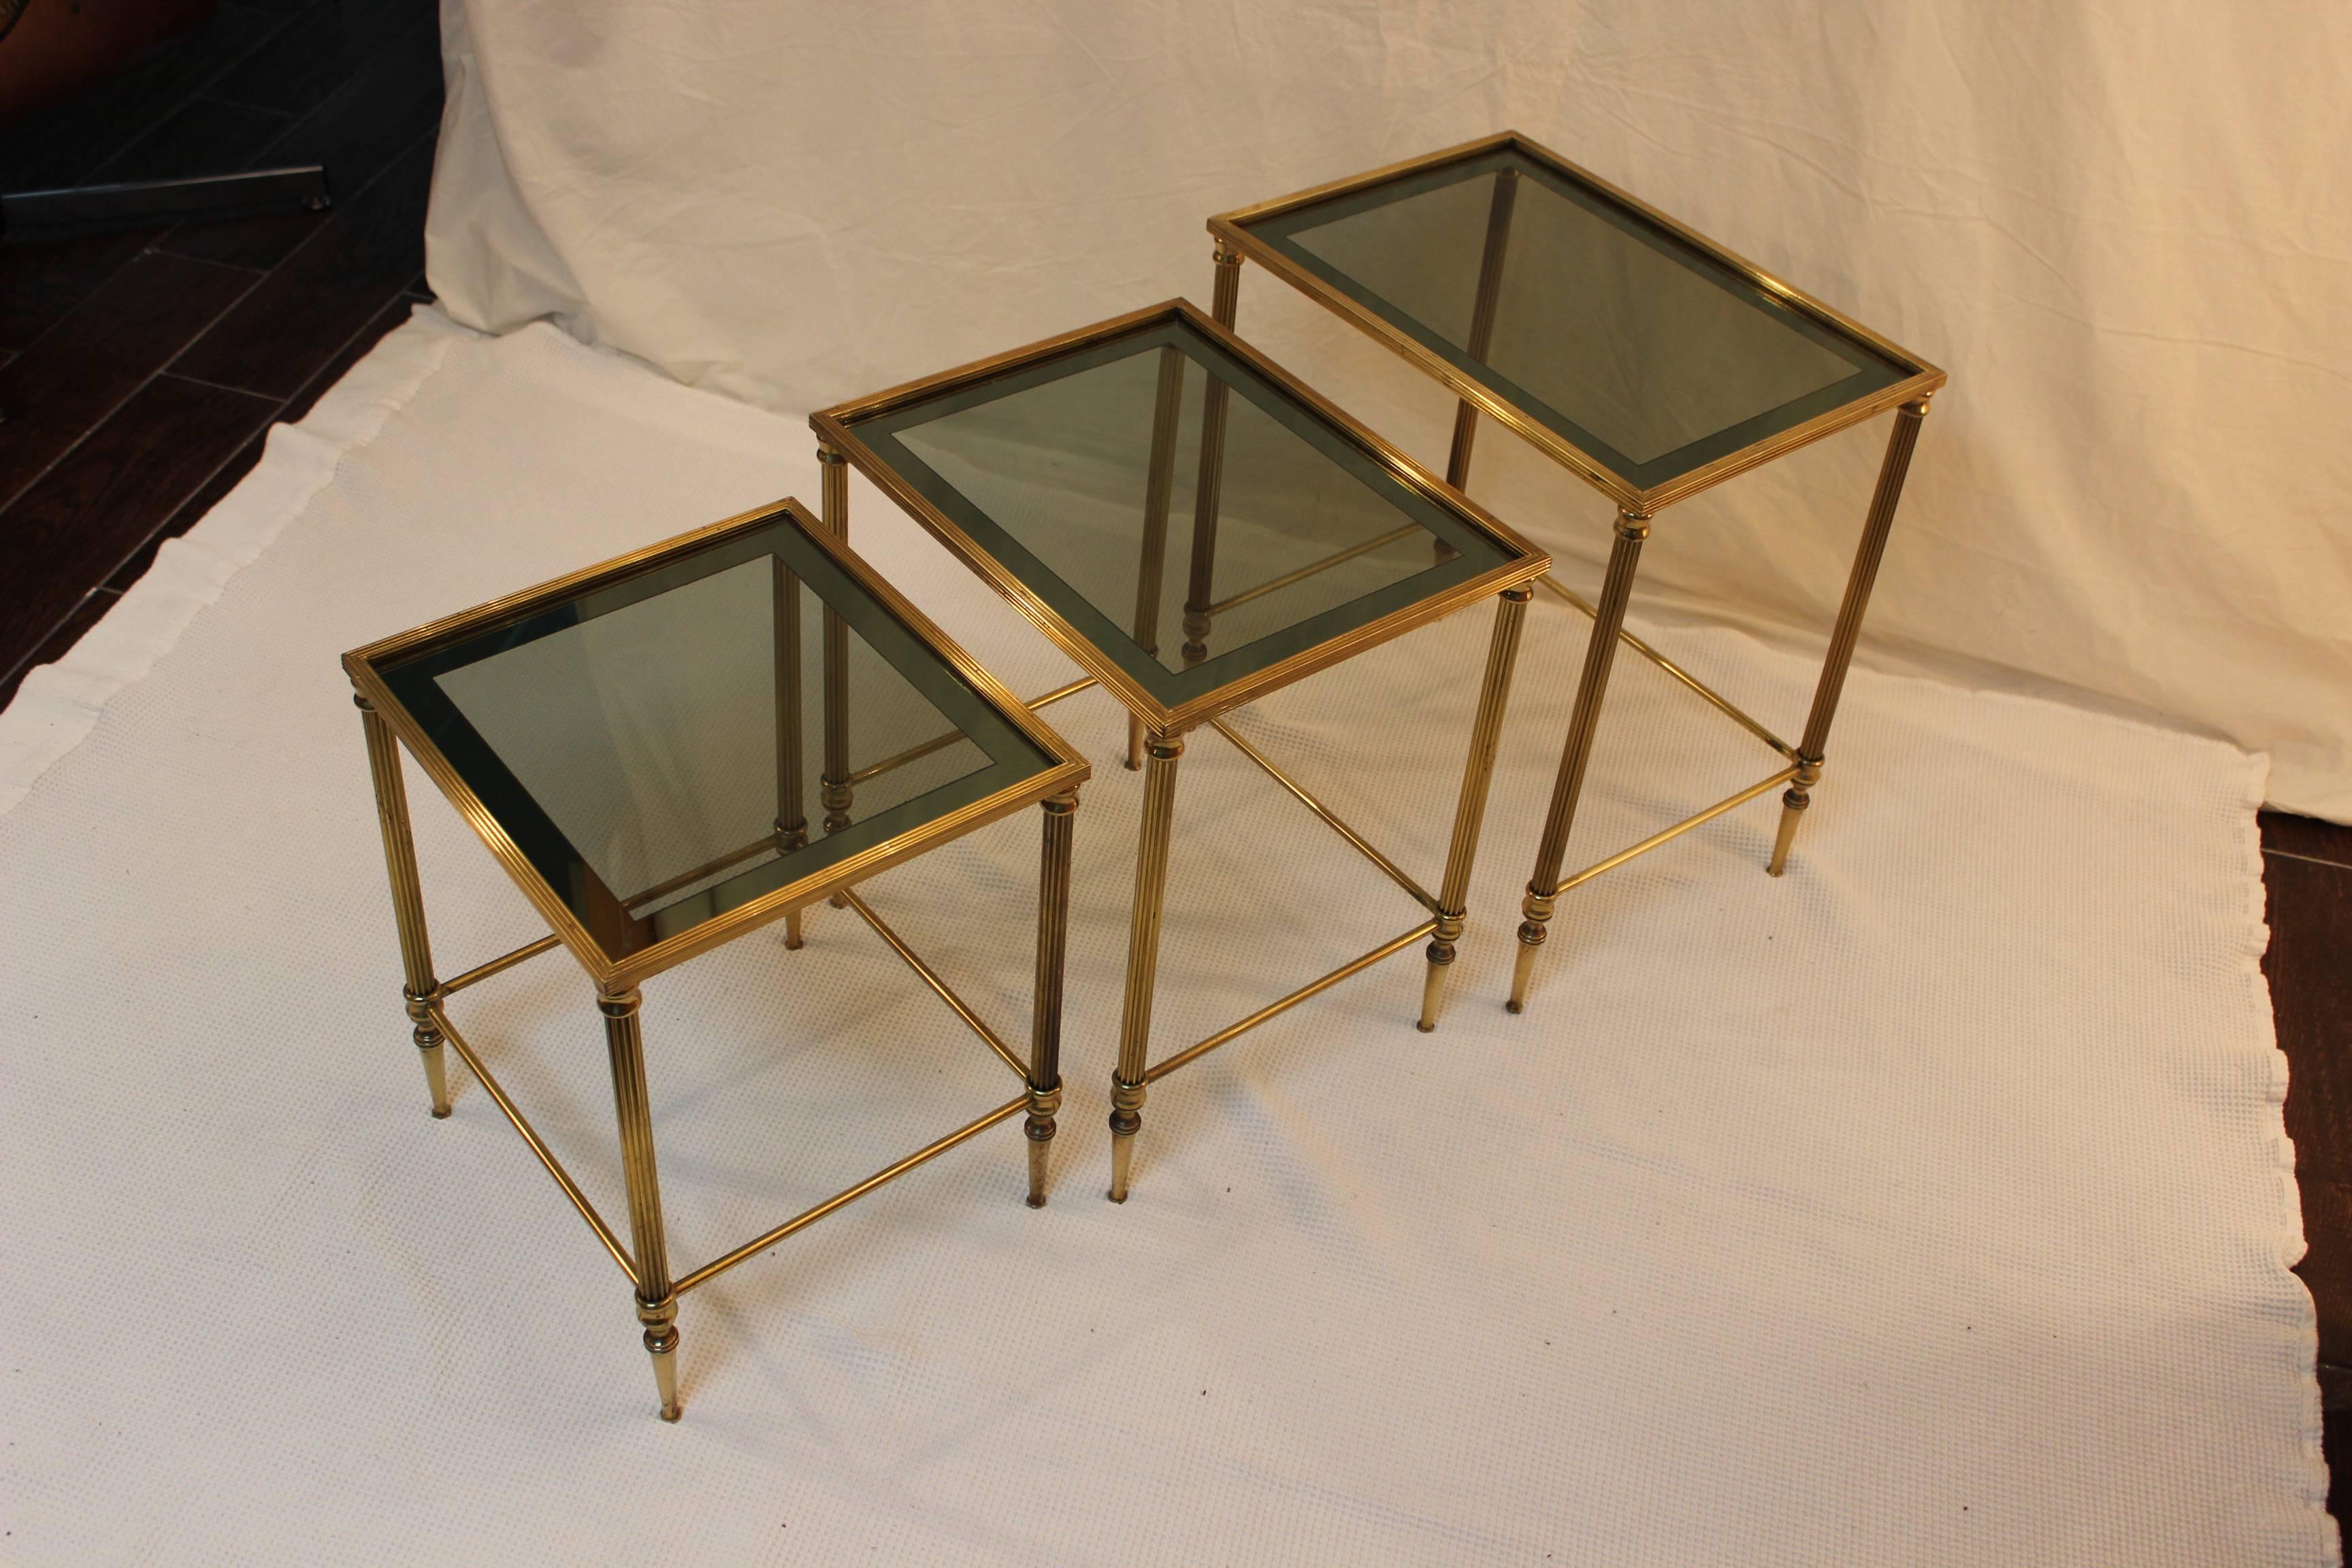 1950's Italian solid brass modern nesting tables with glass tops.

tables measurements:
Large table width 19'' depth 13.5'' height 20.5''
Medium table w. 16.5'' d. 13.5'' h. 19''
Small table      w14'' d. 13.5'' h. 17.5''